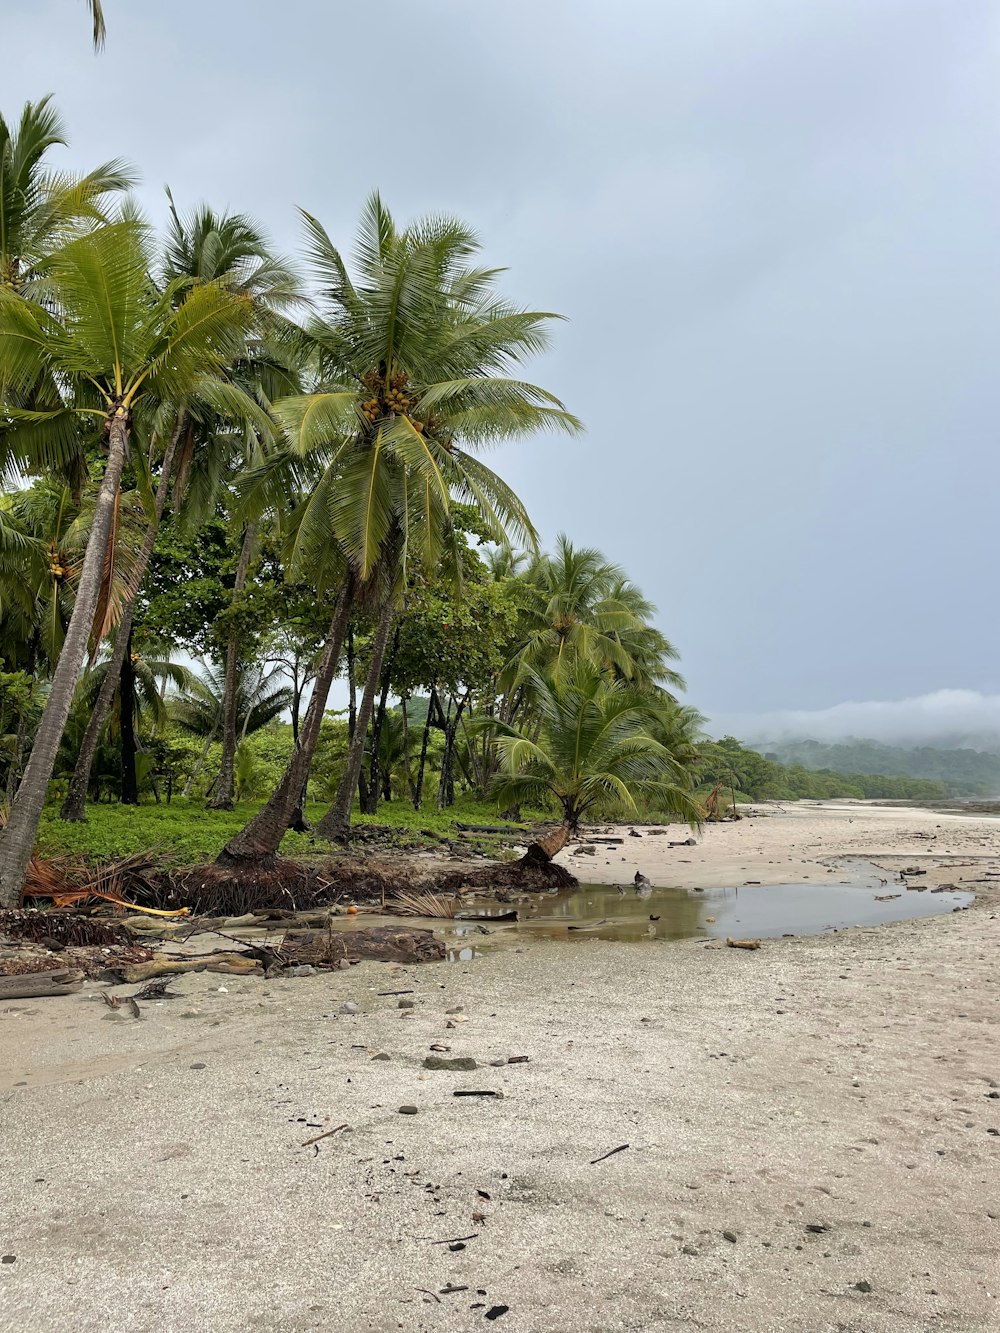 a sandy beach with palm trees and a body of water